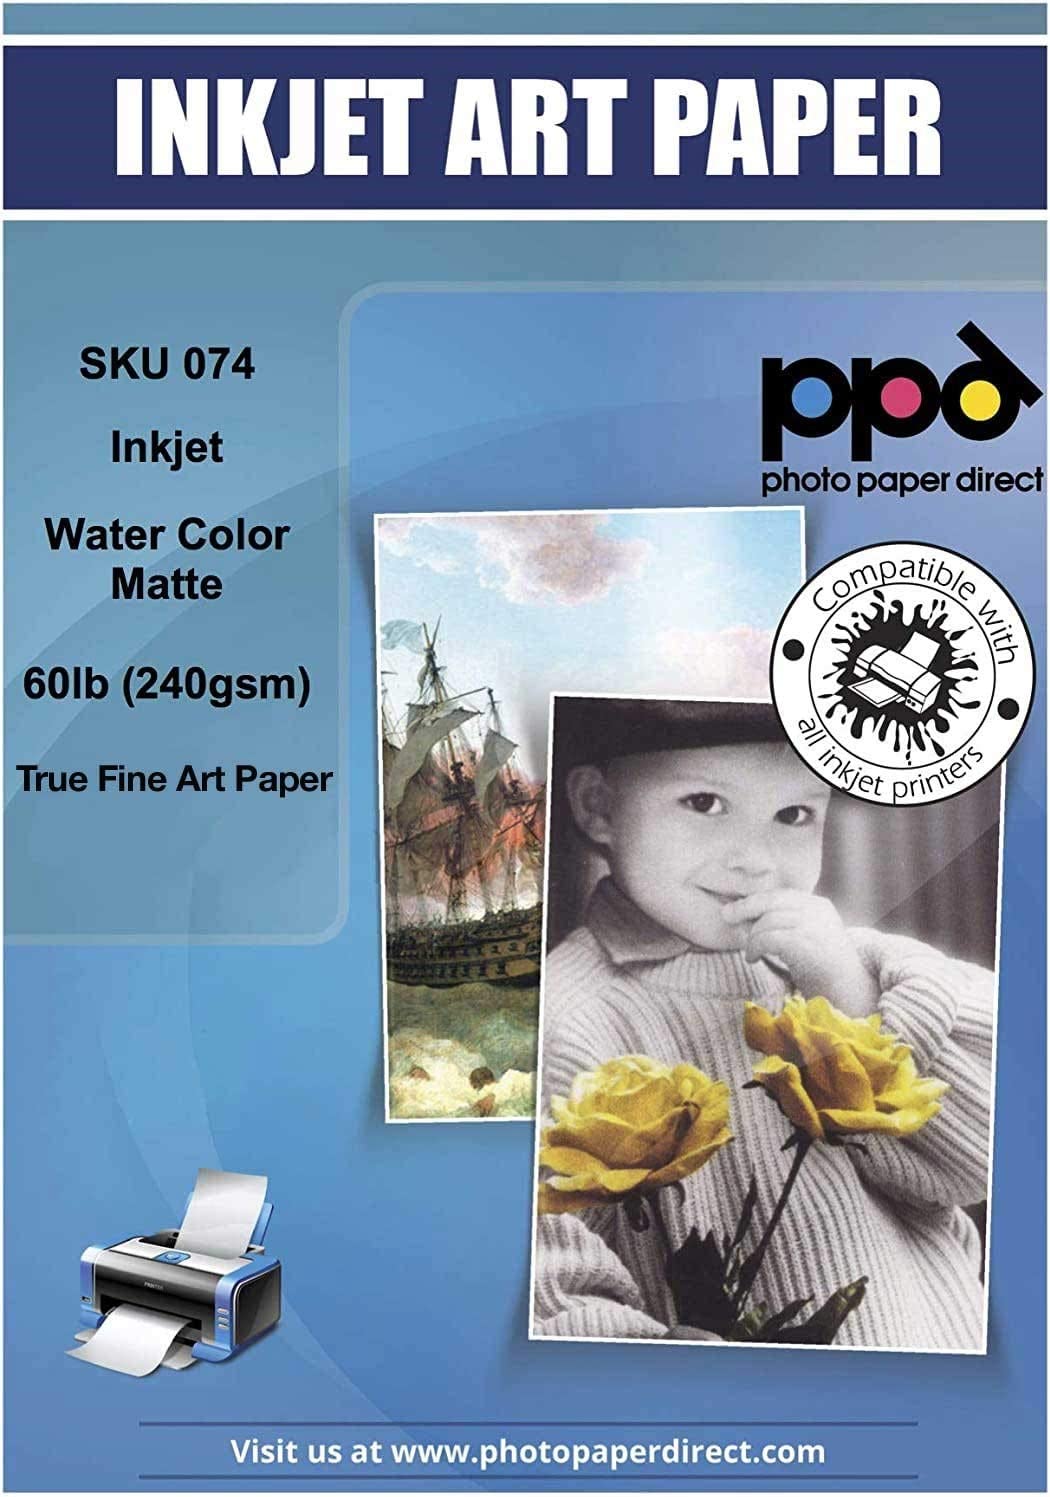 Inkjet Watercolor Matte Giclee Paper 60lb (240gsm) 8.5 x 11" PPD-74